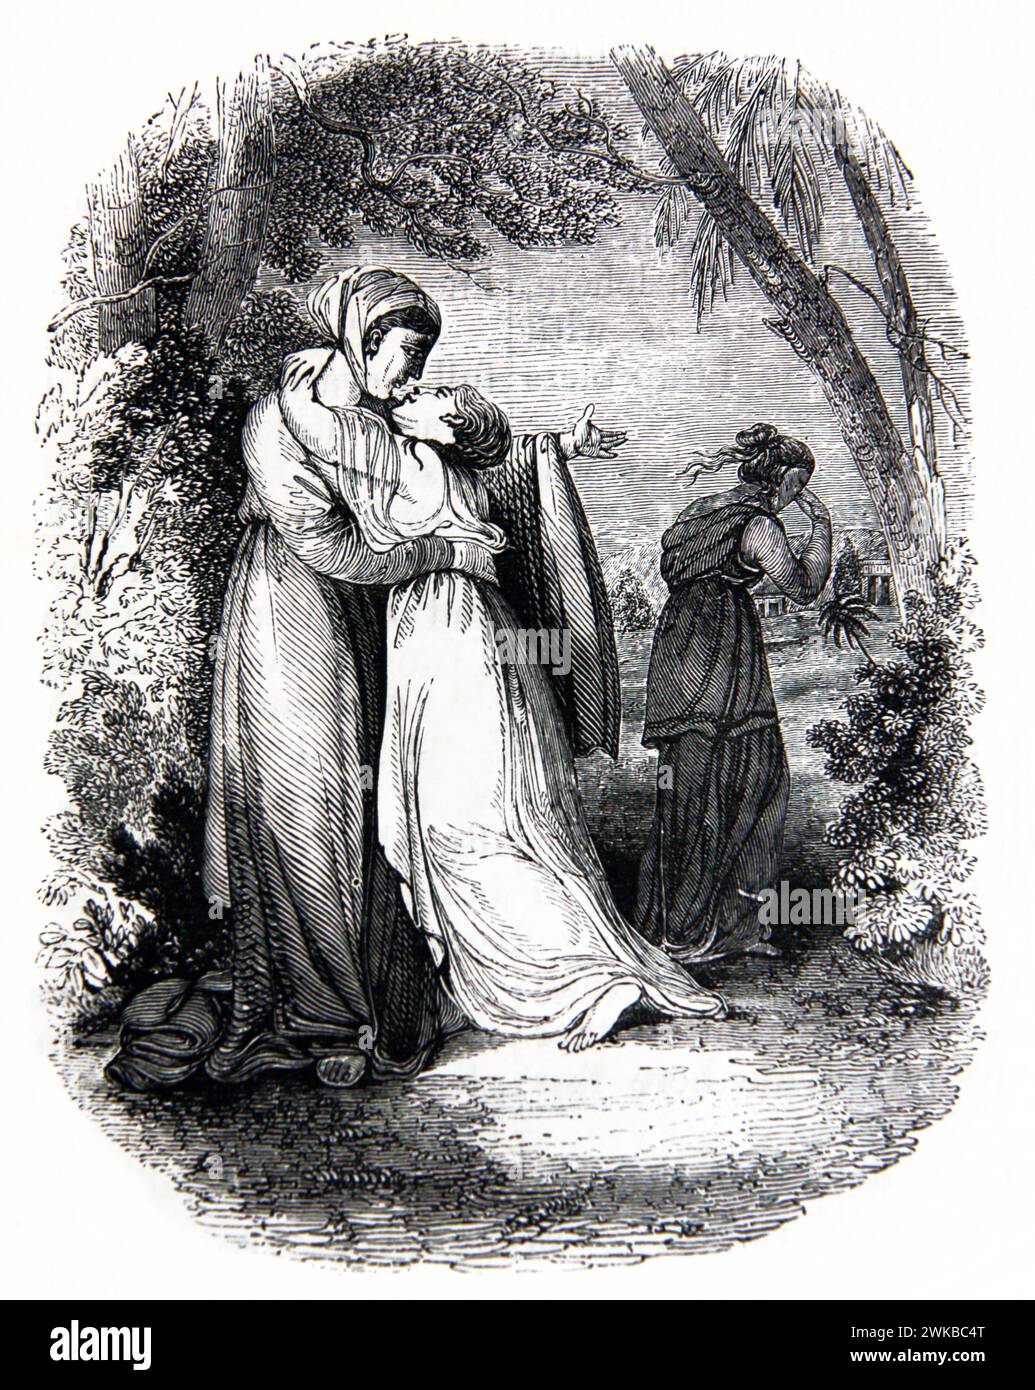 Illustration of Ruth and Naomi - Naomi Set Out to return to Canaan Naomi Told her Daughters-in-law Ruth and Orpah to return to Moab, Orpah Returned Bu Stock Photo